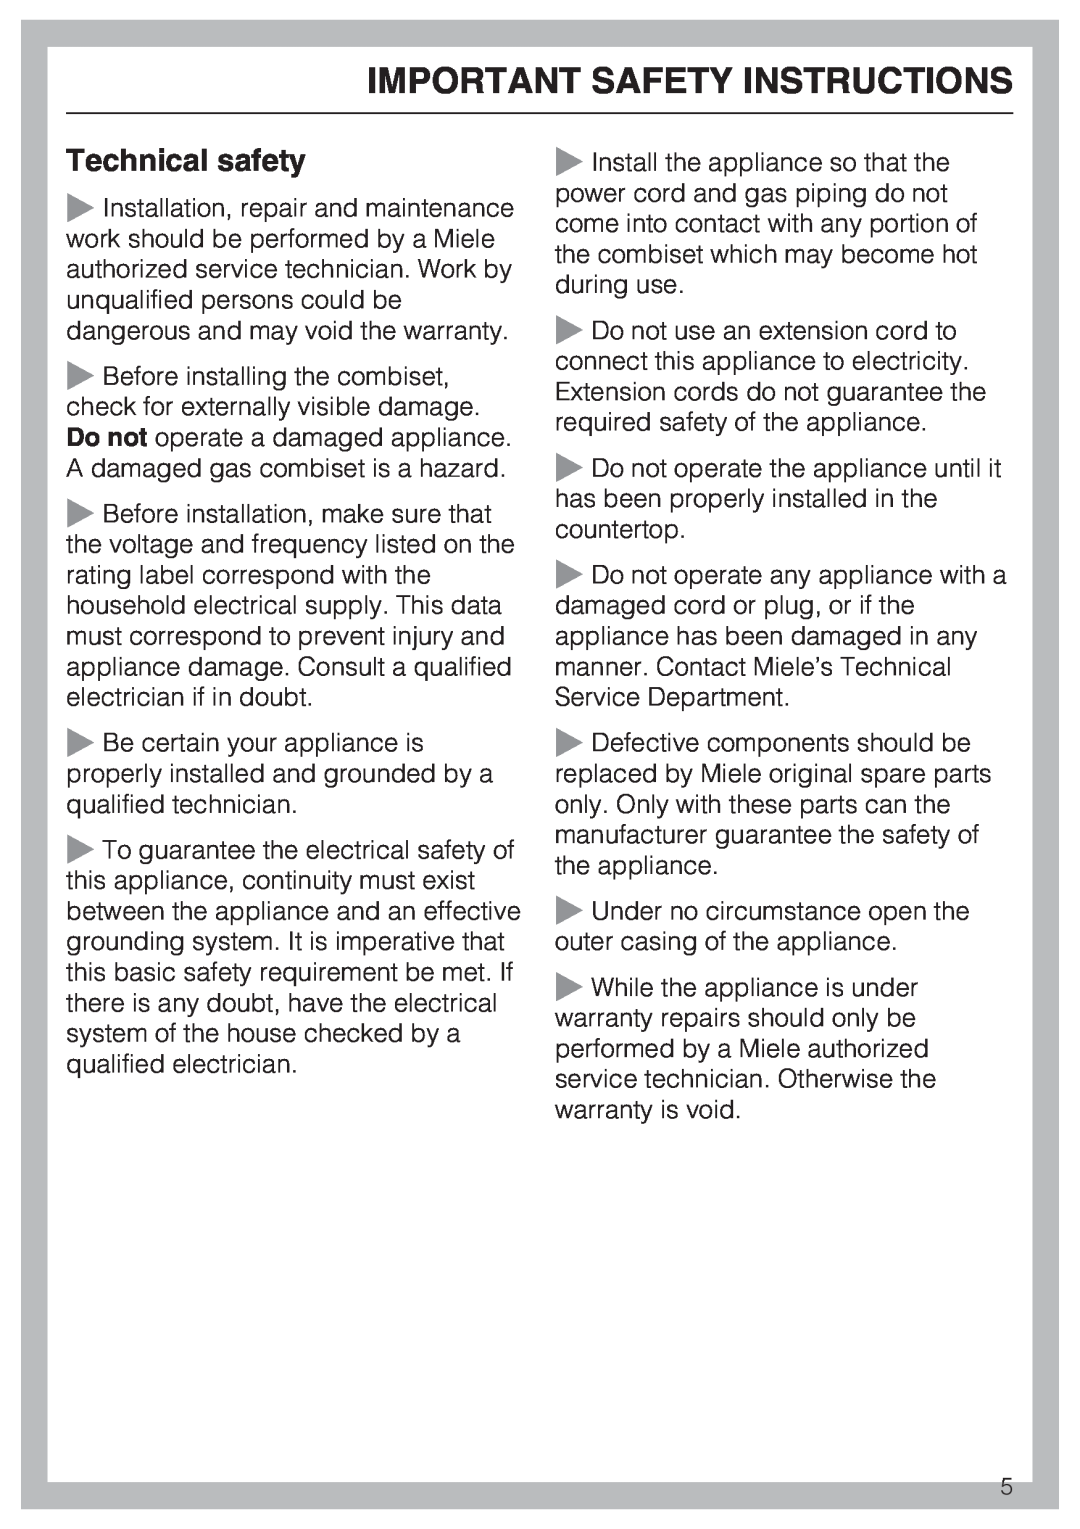 Miele CS 1028 installation instructions Technical safety, Important Safety Instructions 